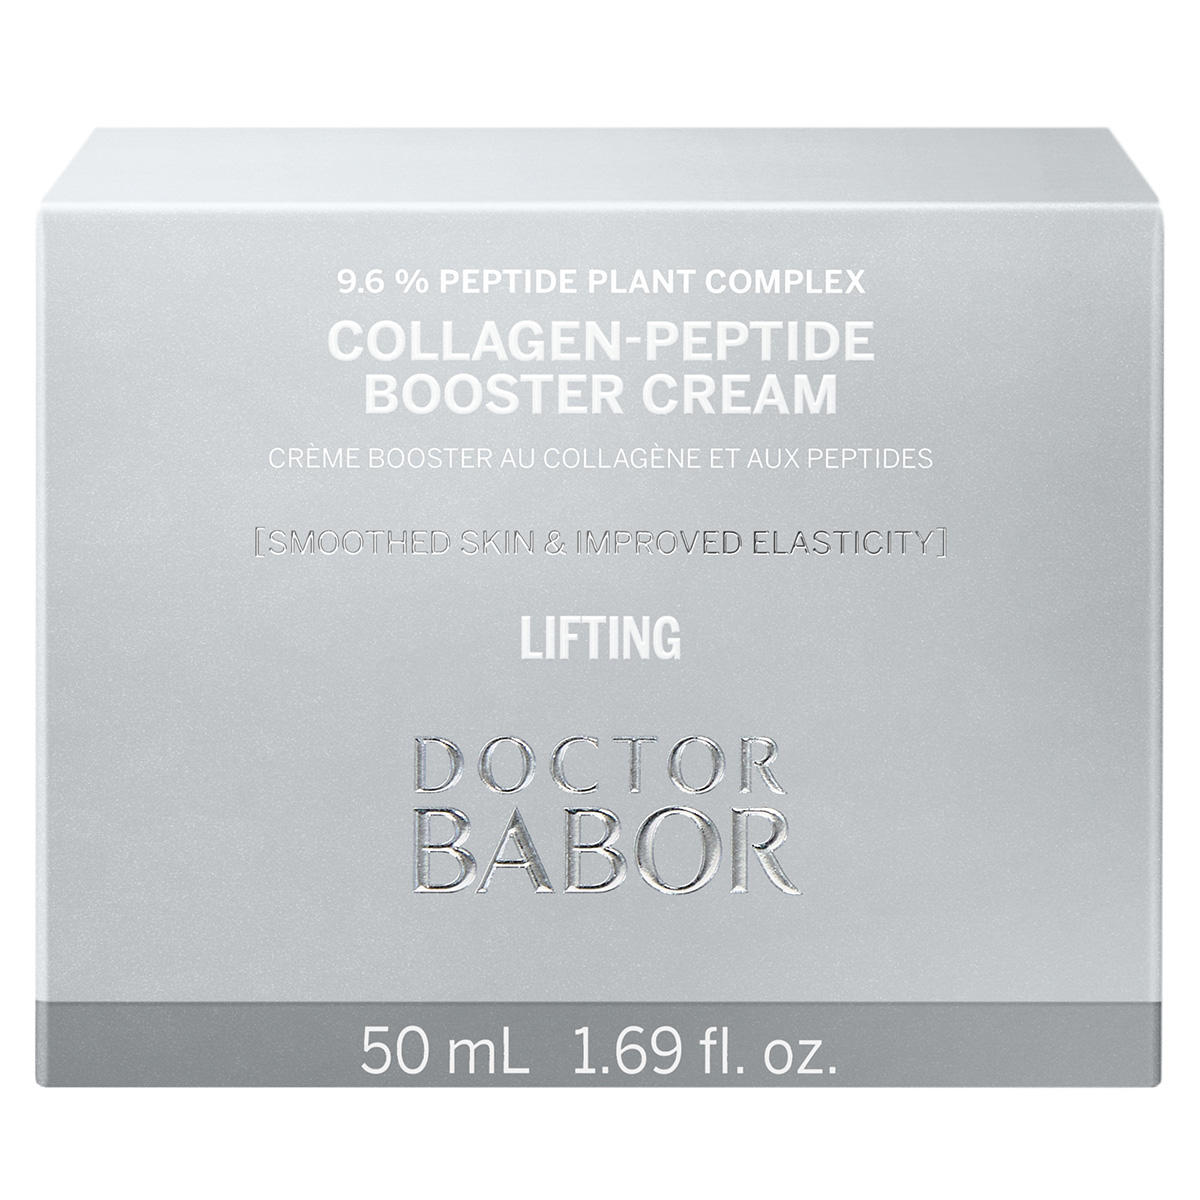 BABOR DOCTOR BABOR LIFTING COLLAGEN-PEPTIDE BOOSTER CREAM 50 ml - 2